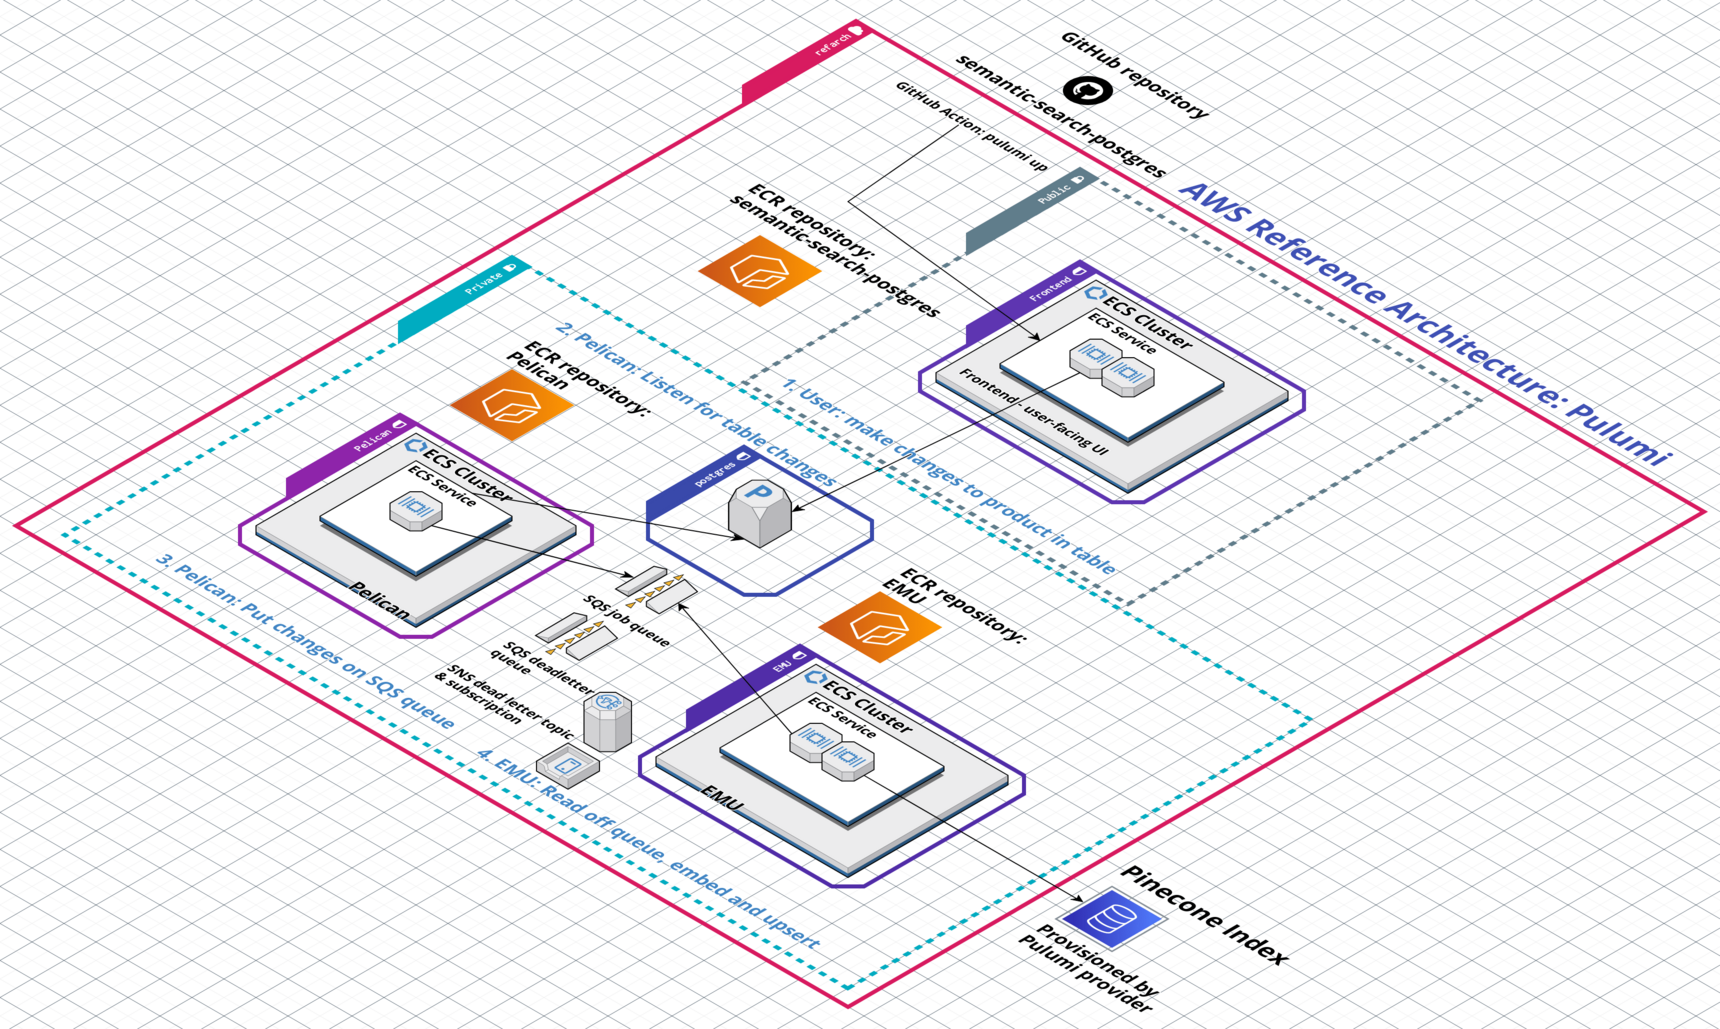 The Pinecone AWS Reference Architecture schematic